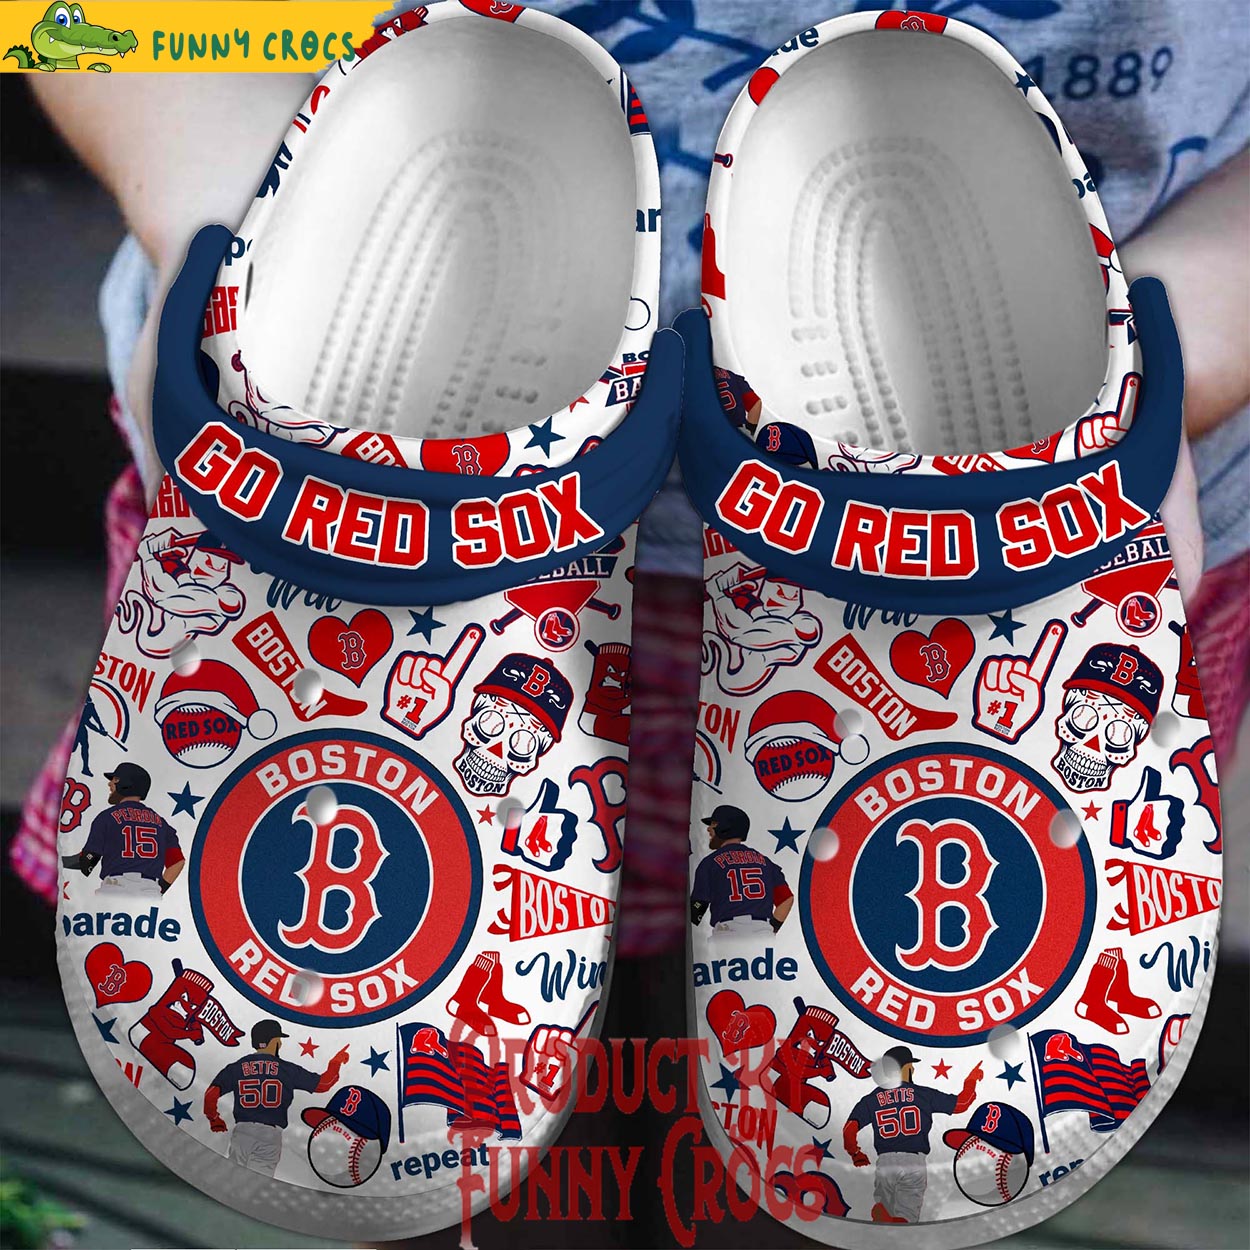 Go Red Sox Boston Red Sox Crocs Slippers